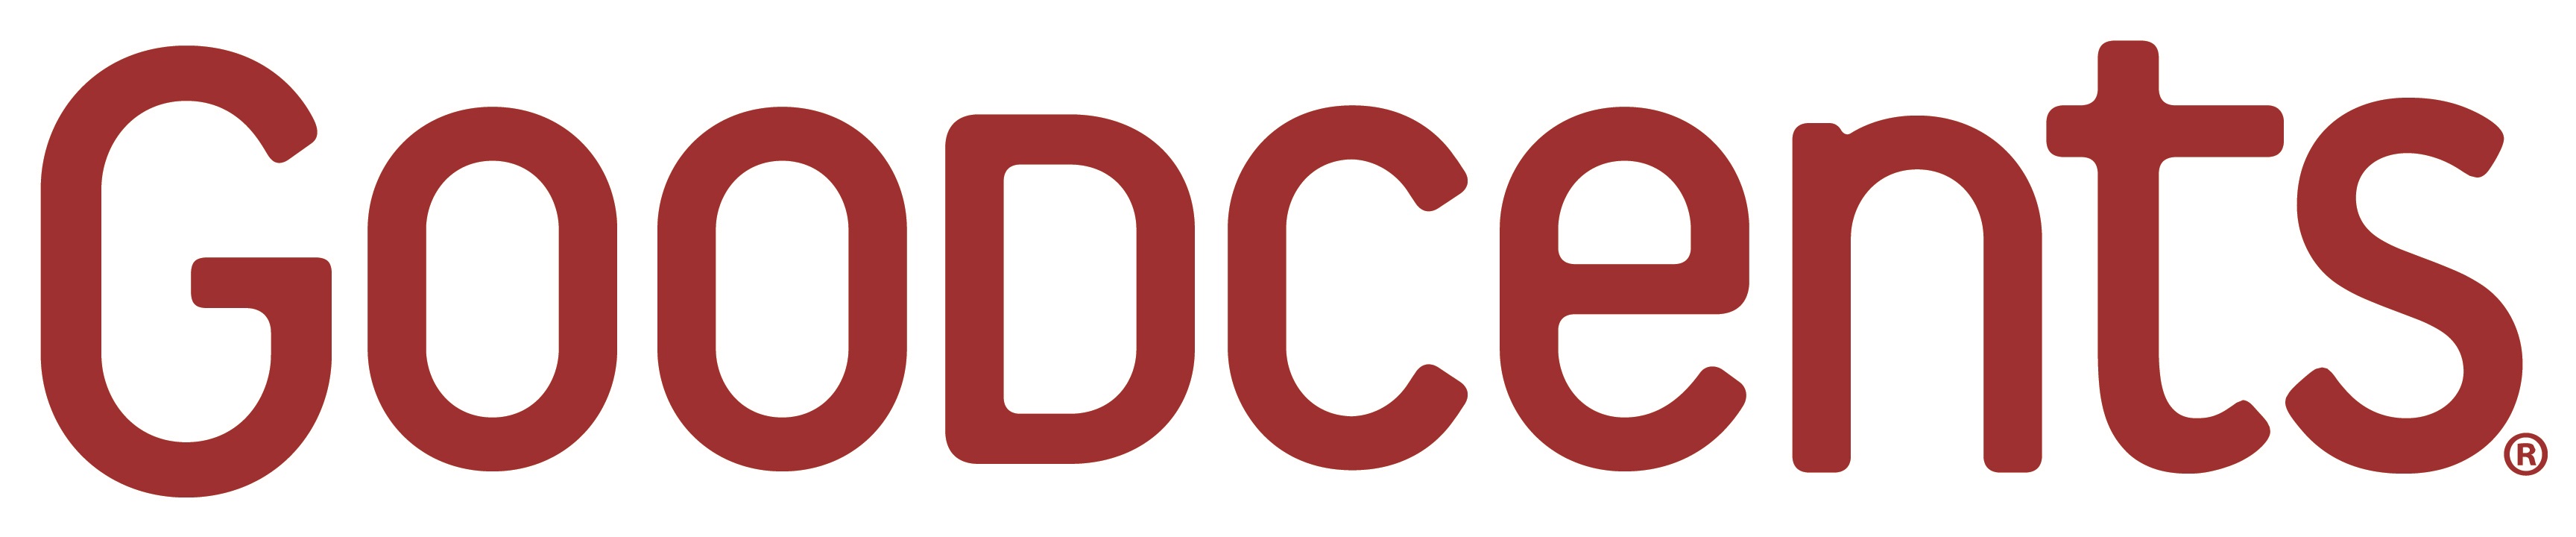 goodcents red logo.jpg